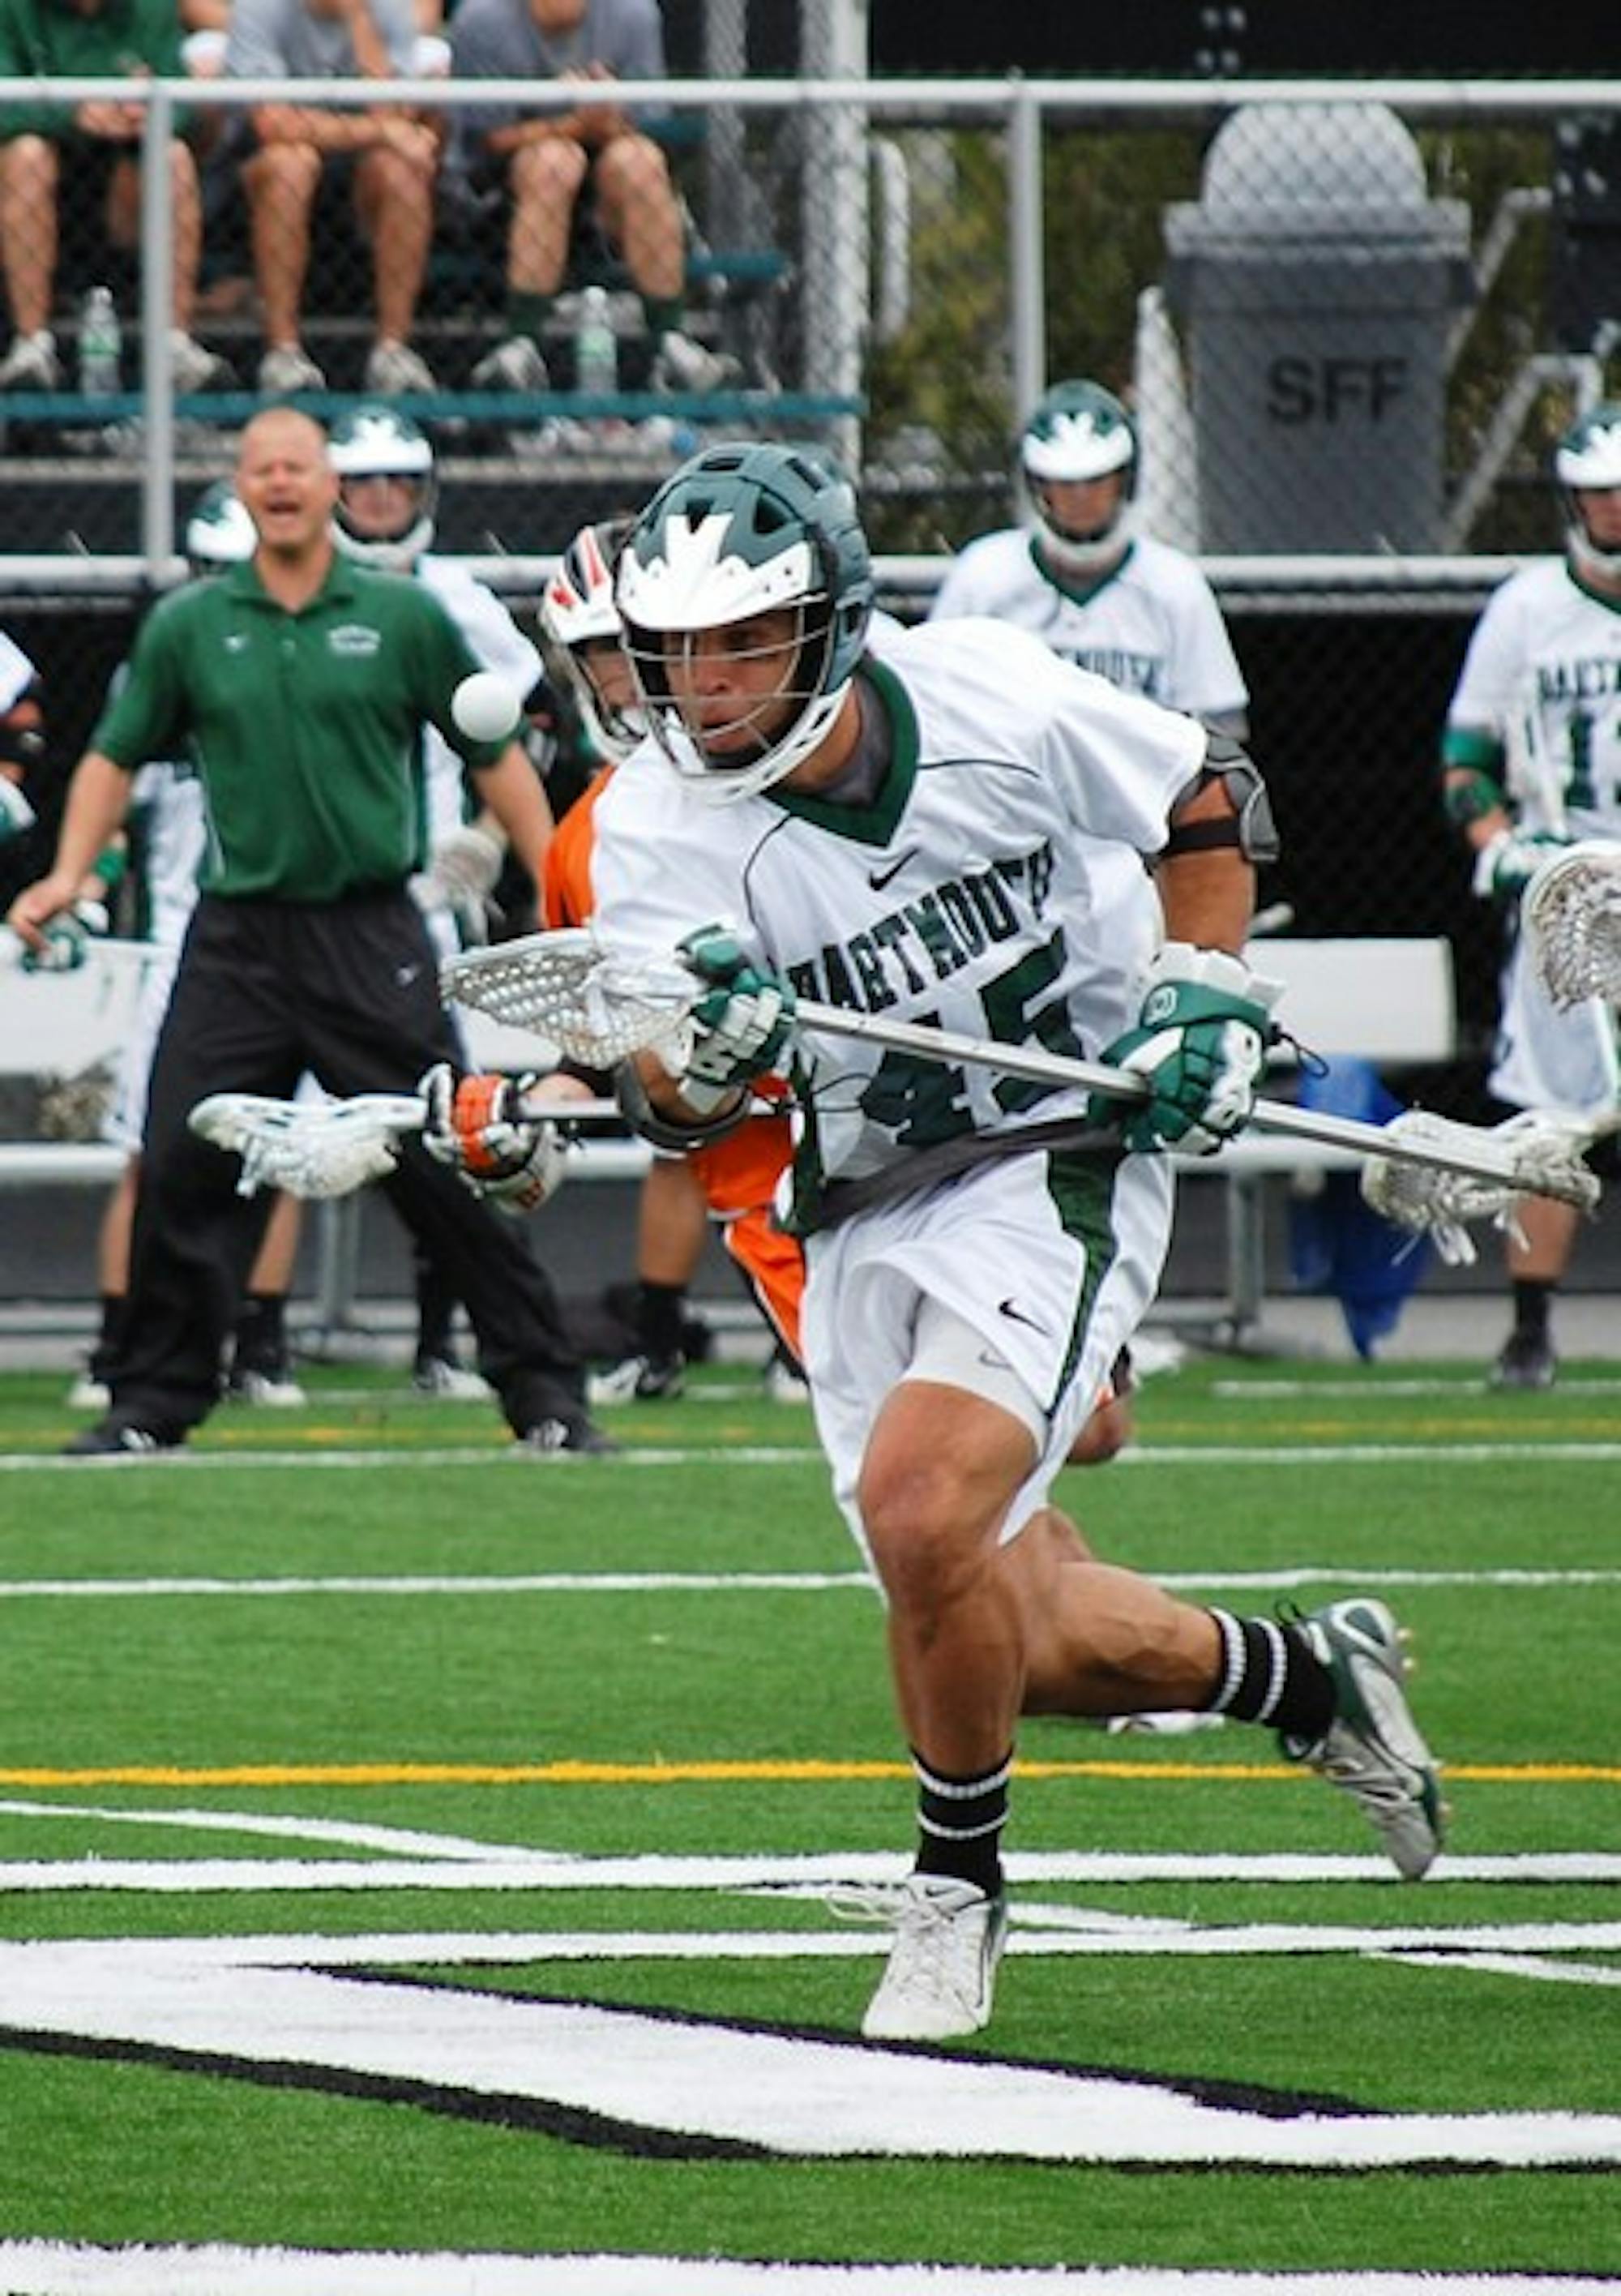 Senior midfielder and honorable mention All-Ivy Chad Gaudet '08 led the Big Green faceoff unit, winning .560 of his draws and collecting 81 groundballs.